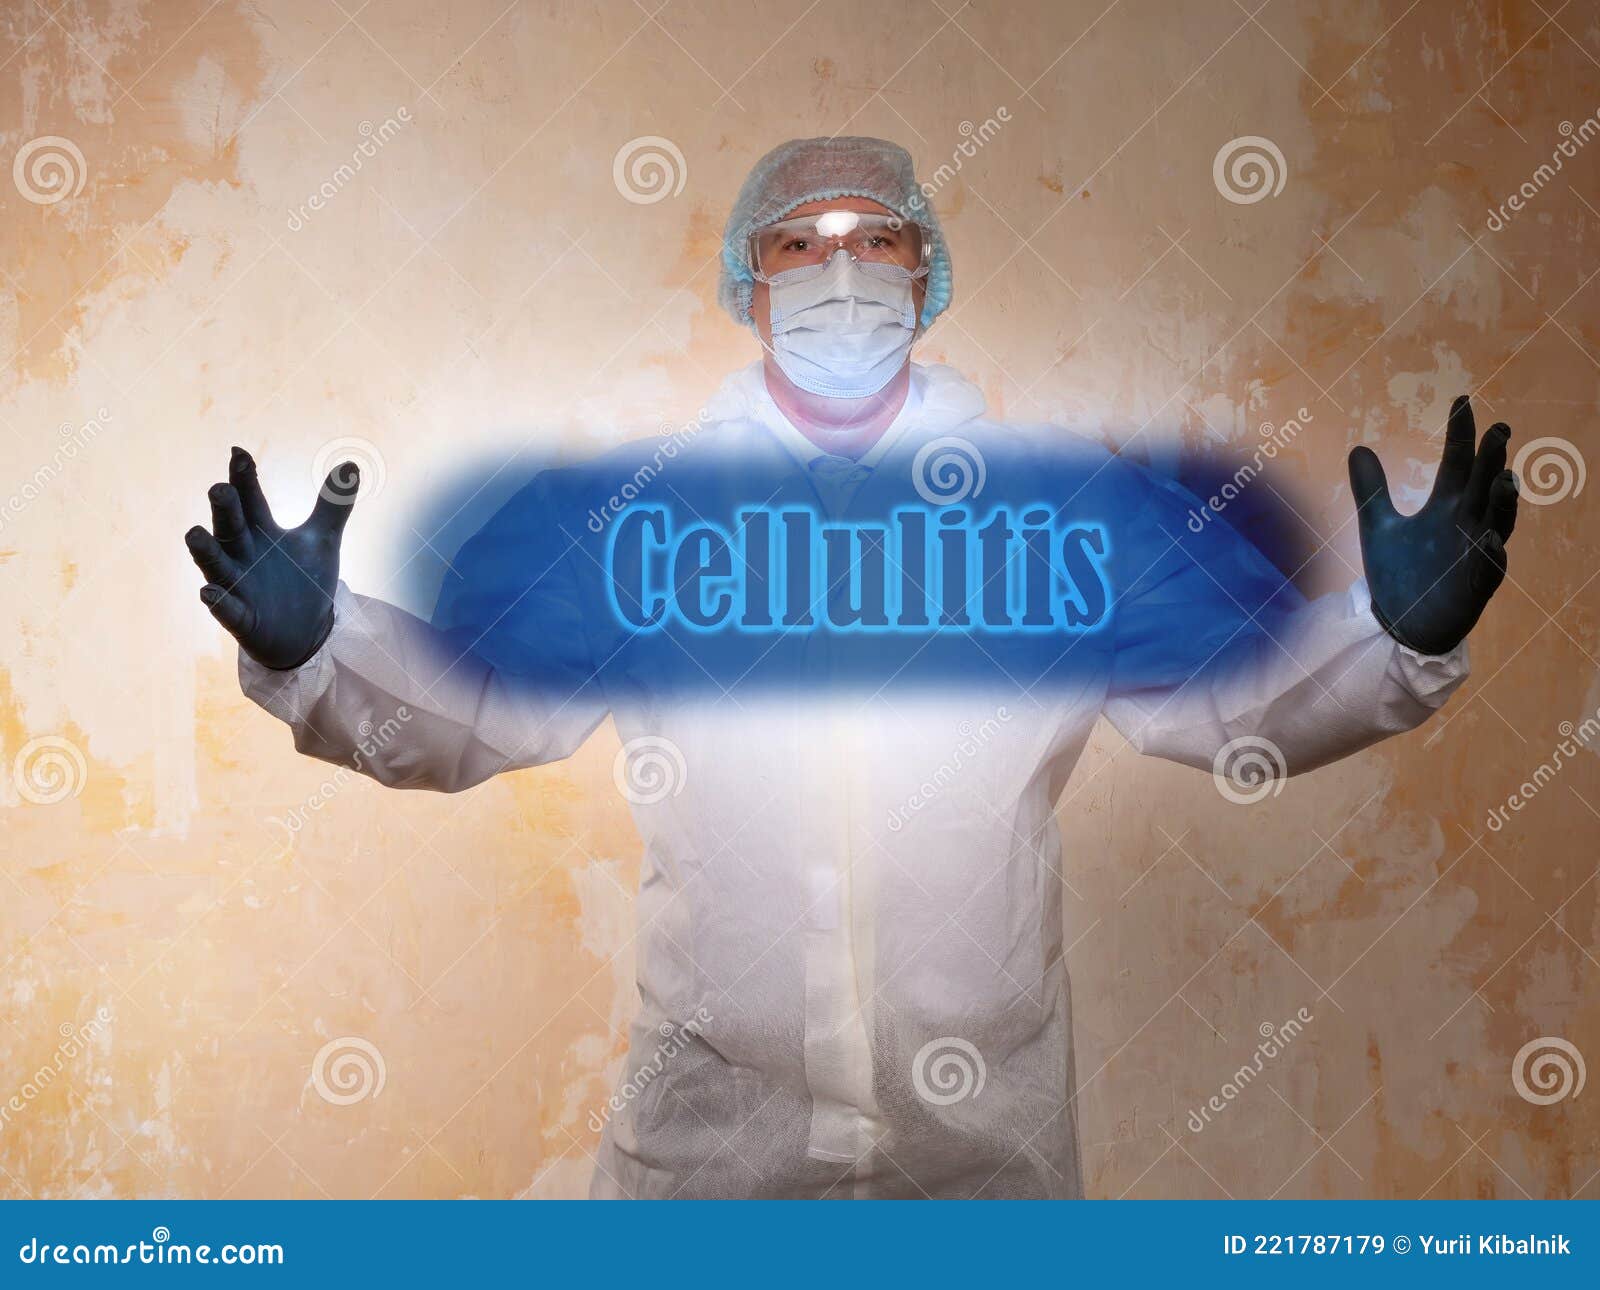 medical concept meaning cellulitis with sign on the sheet